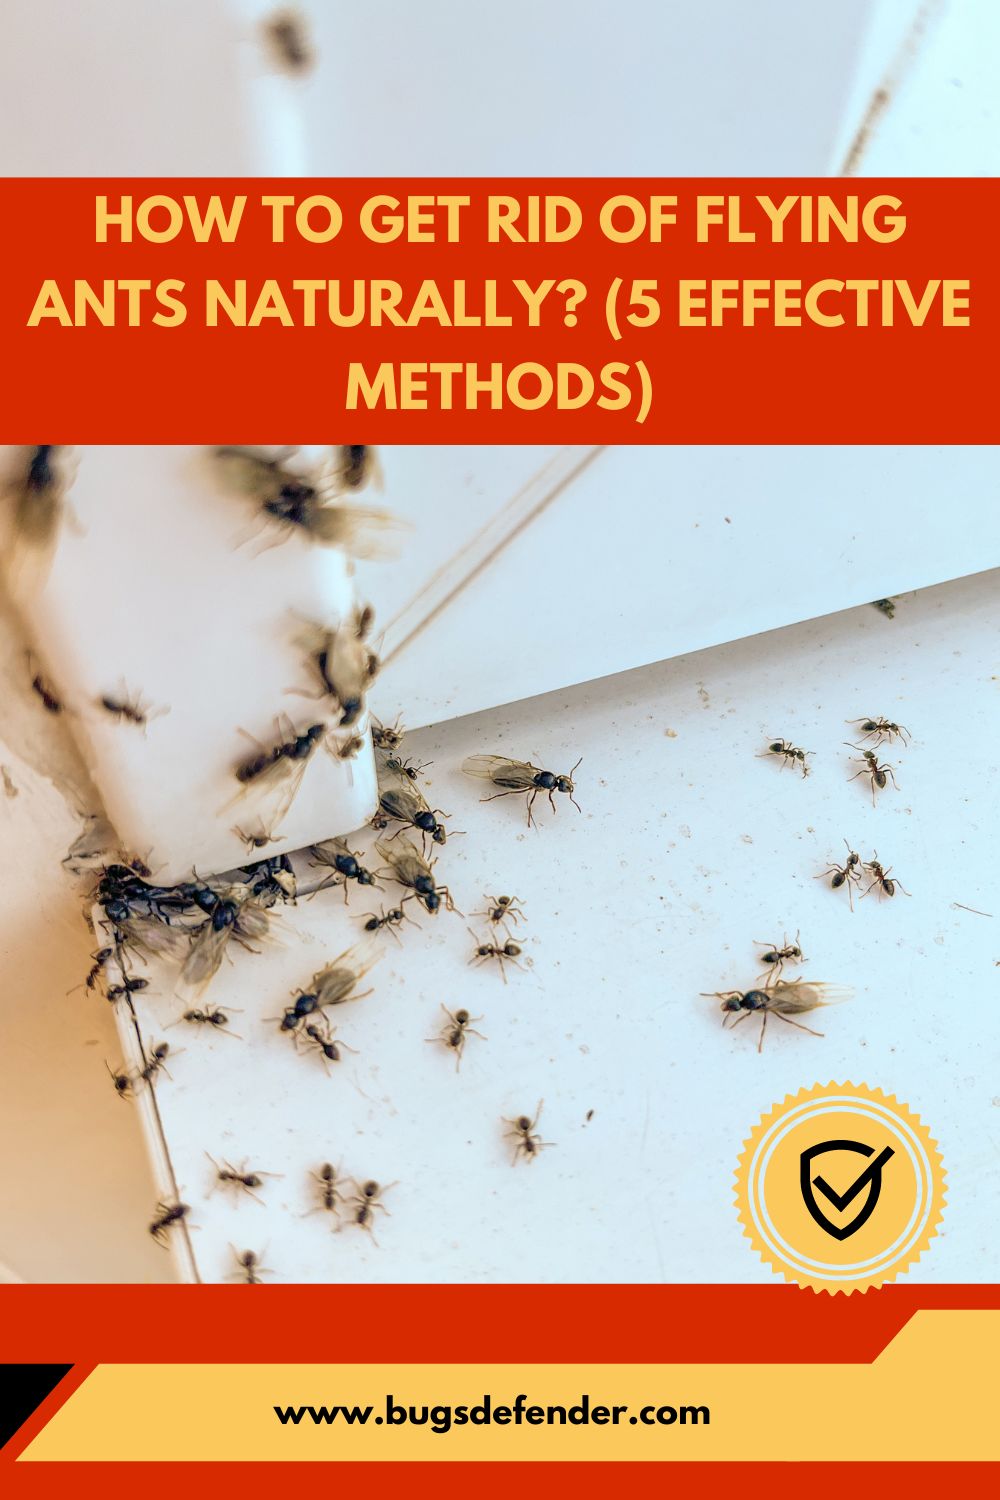 How To Get Rid Of Flying Ants Naturally pin1